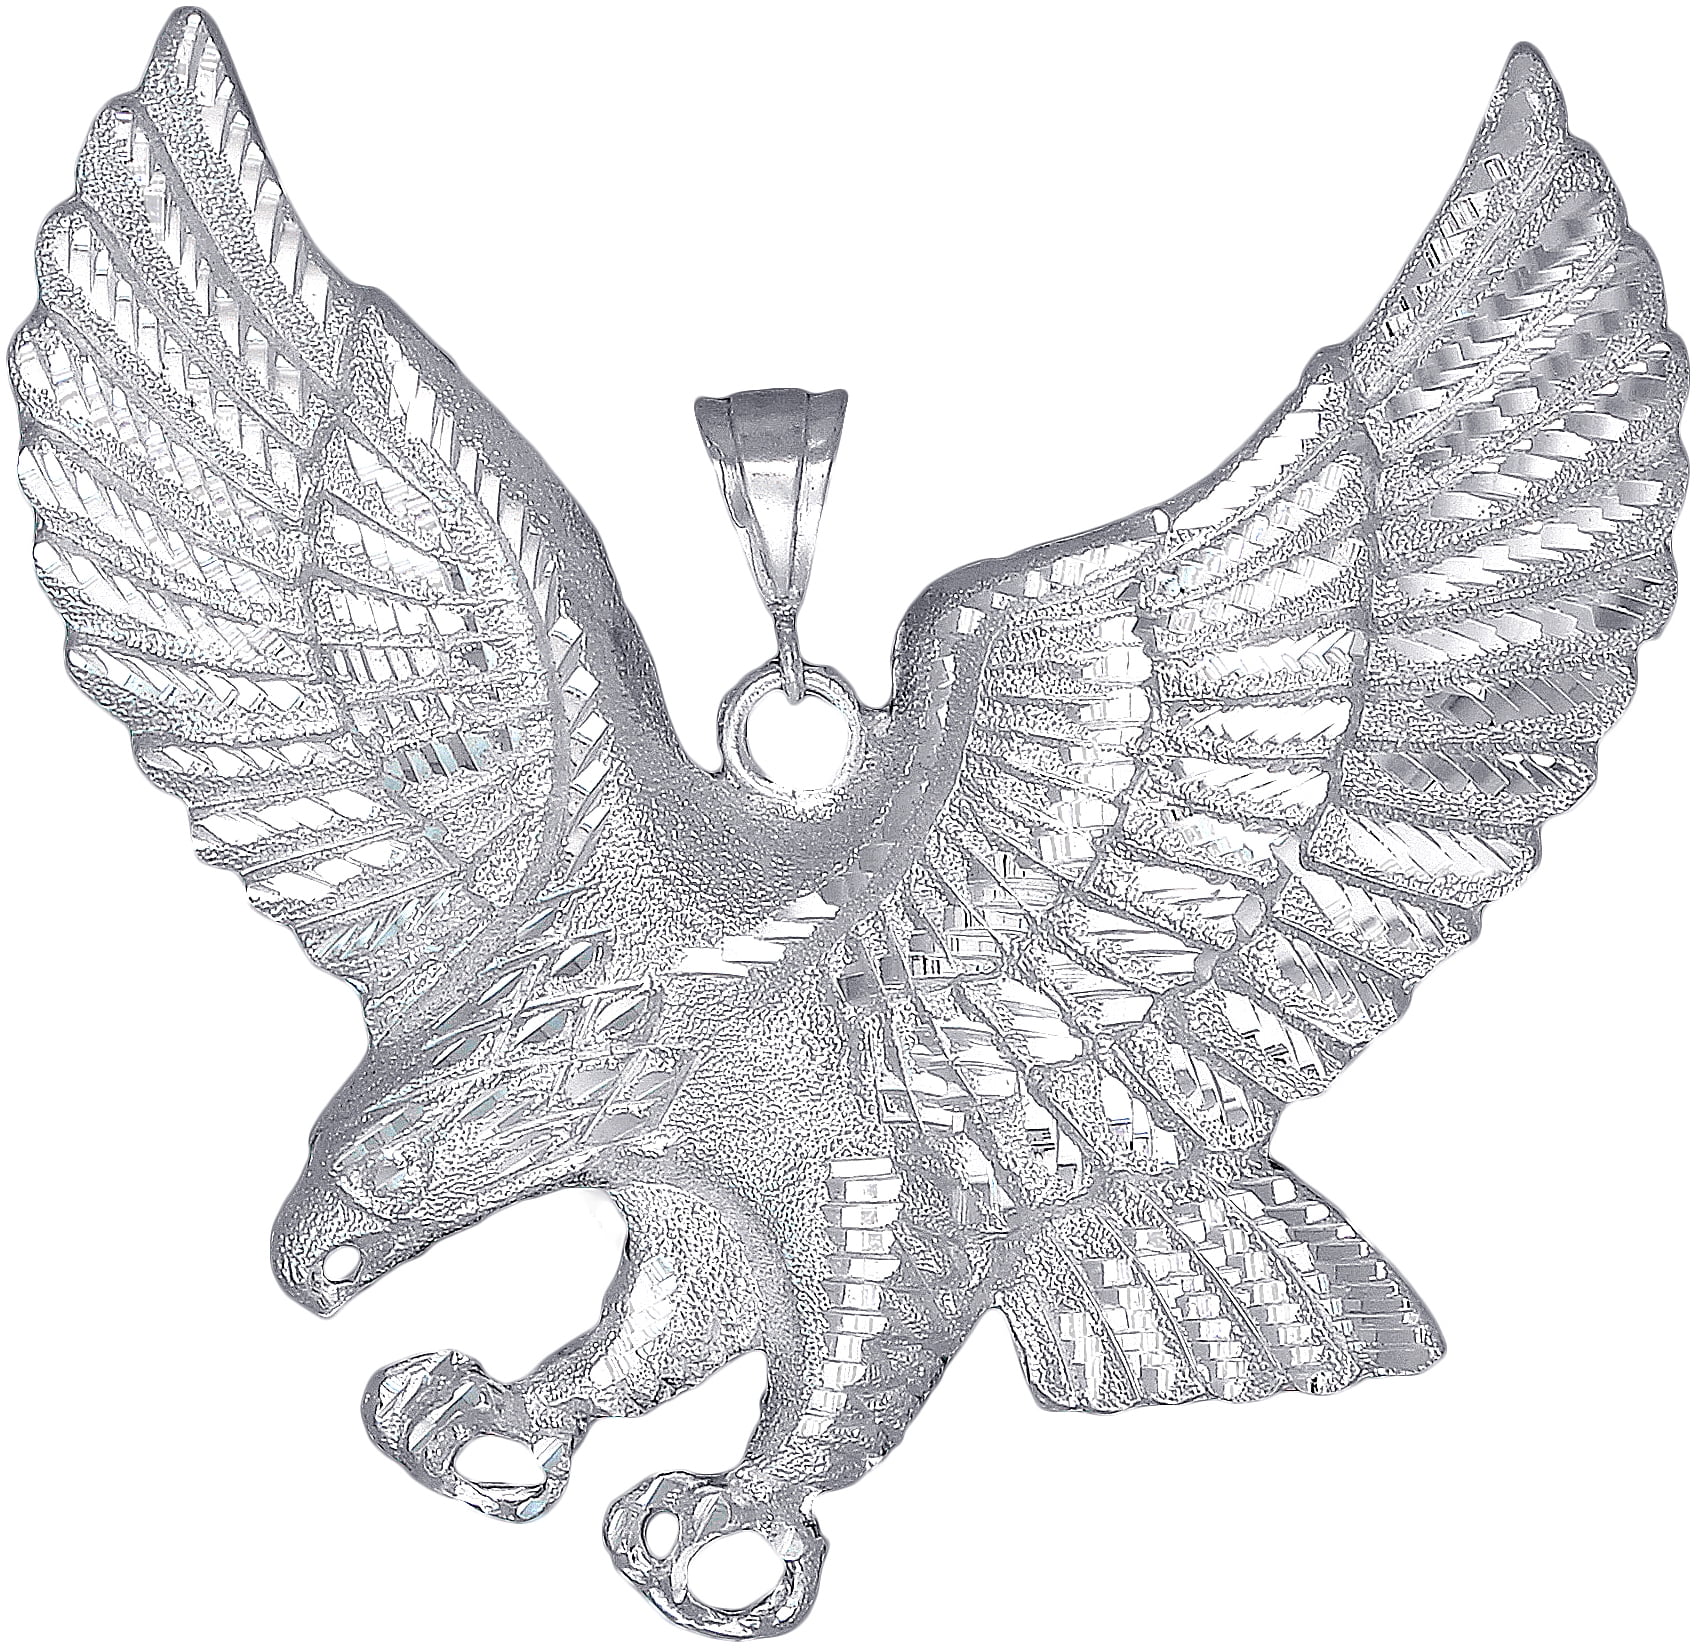 Sterling Silver Eagle Charm Pendant Necklace Diamond Cut Finish with Chain